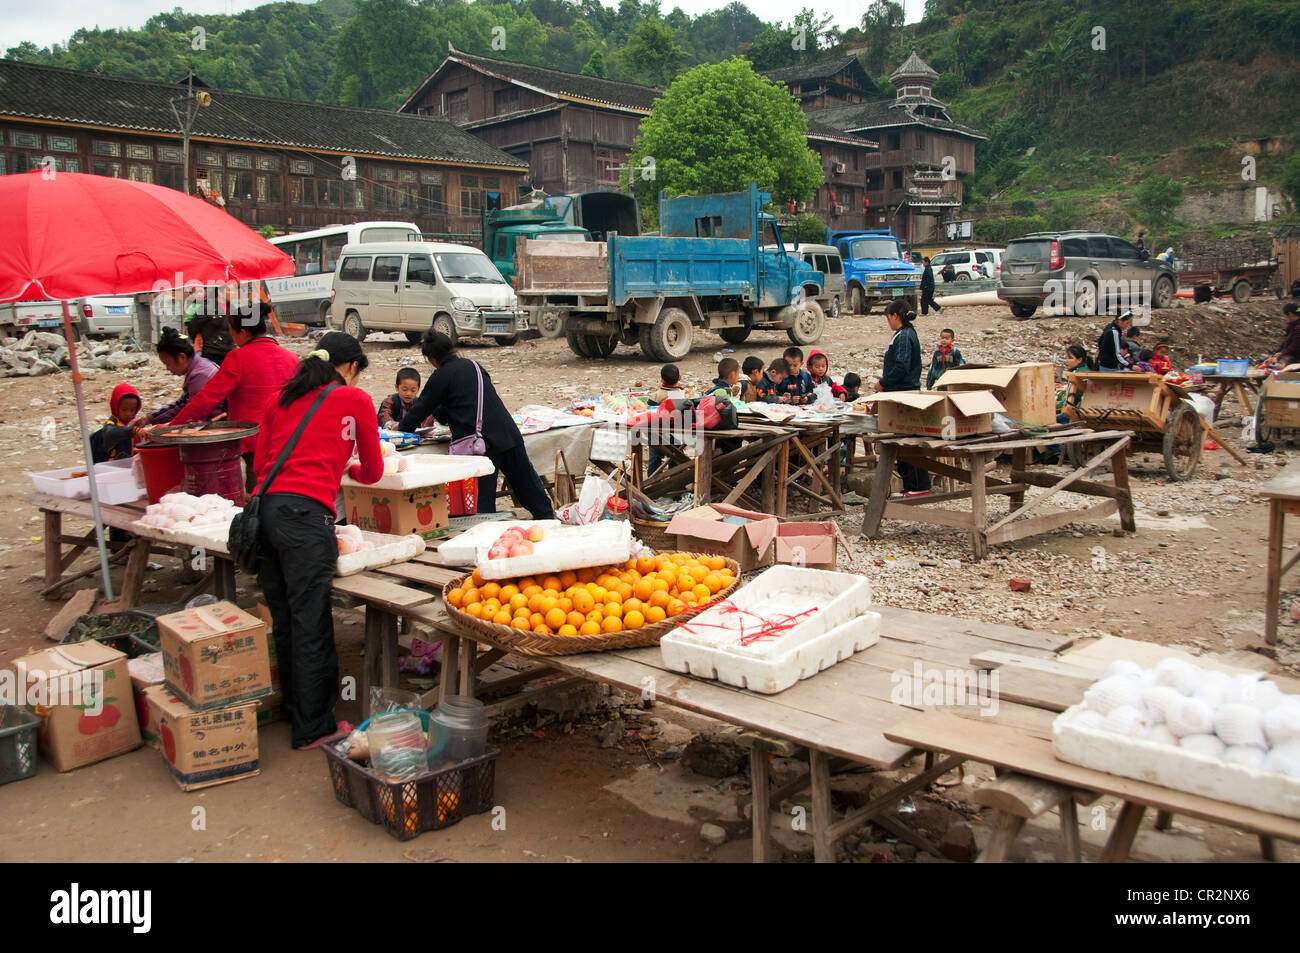 Market stall with sunshade parasol selling oranges and other fruits, Zhaoxing Dong Village, Southern China Stock Photo